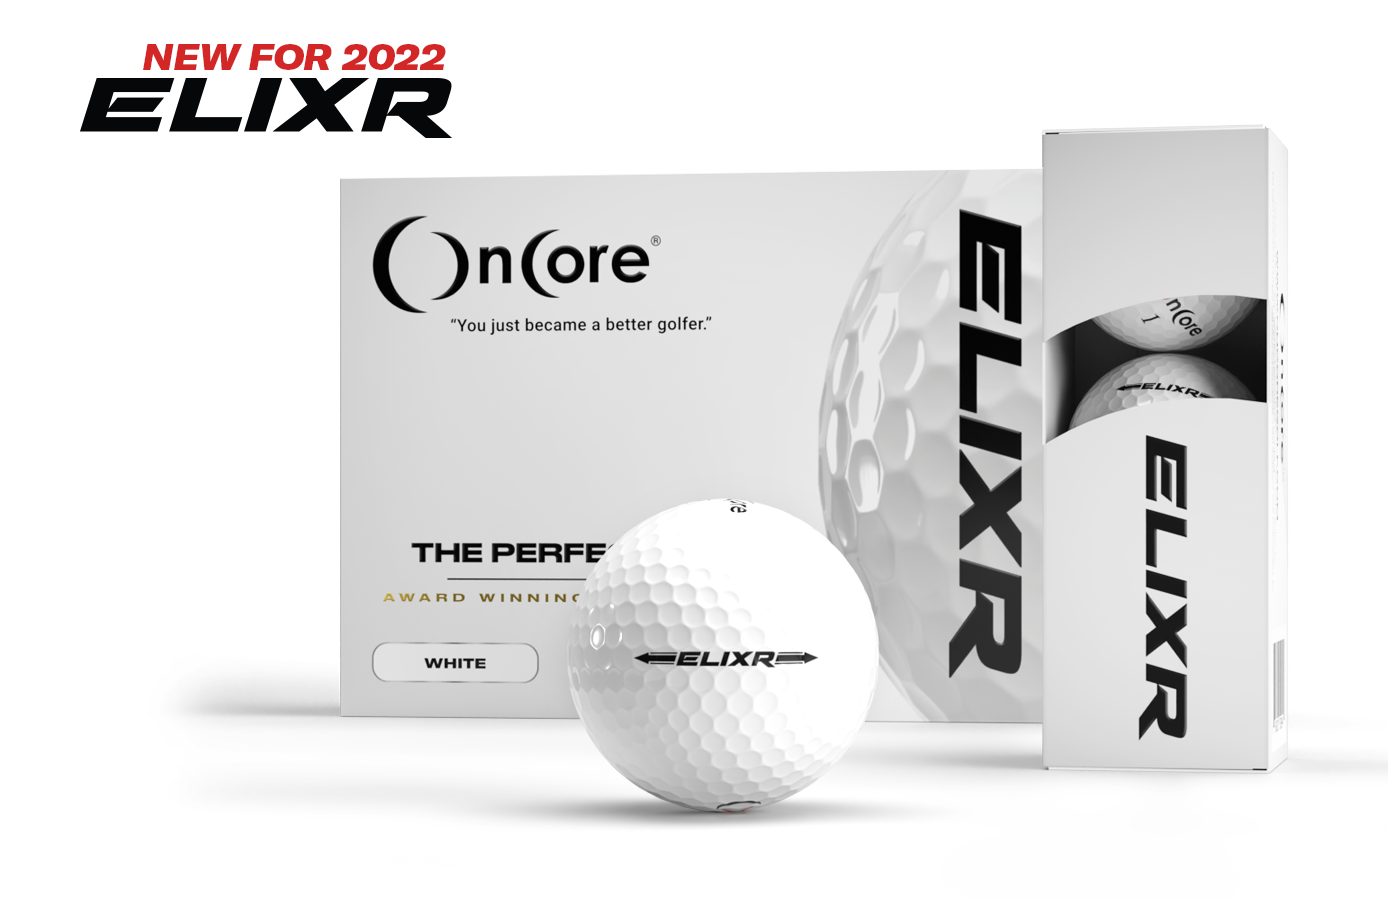 Get Dialed in with the New Enhanced 2022 ELIXR!